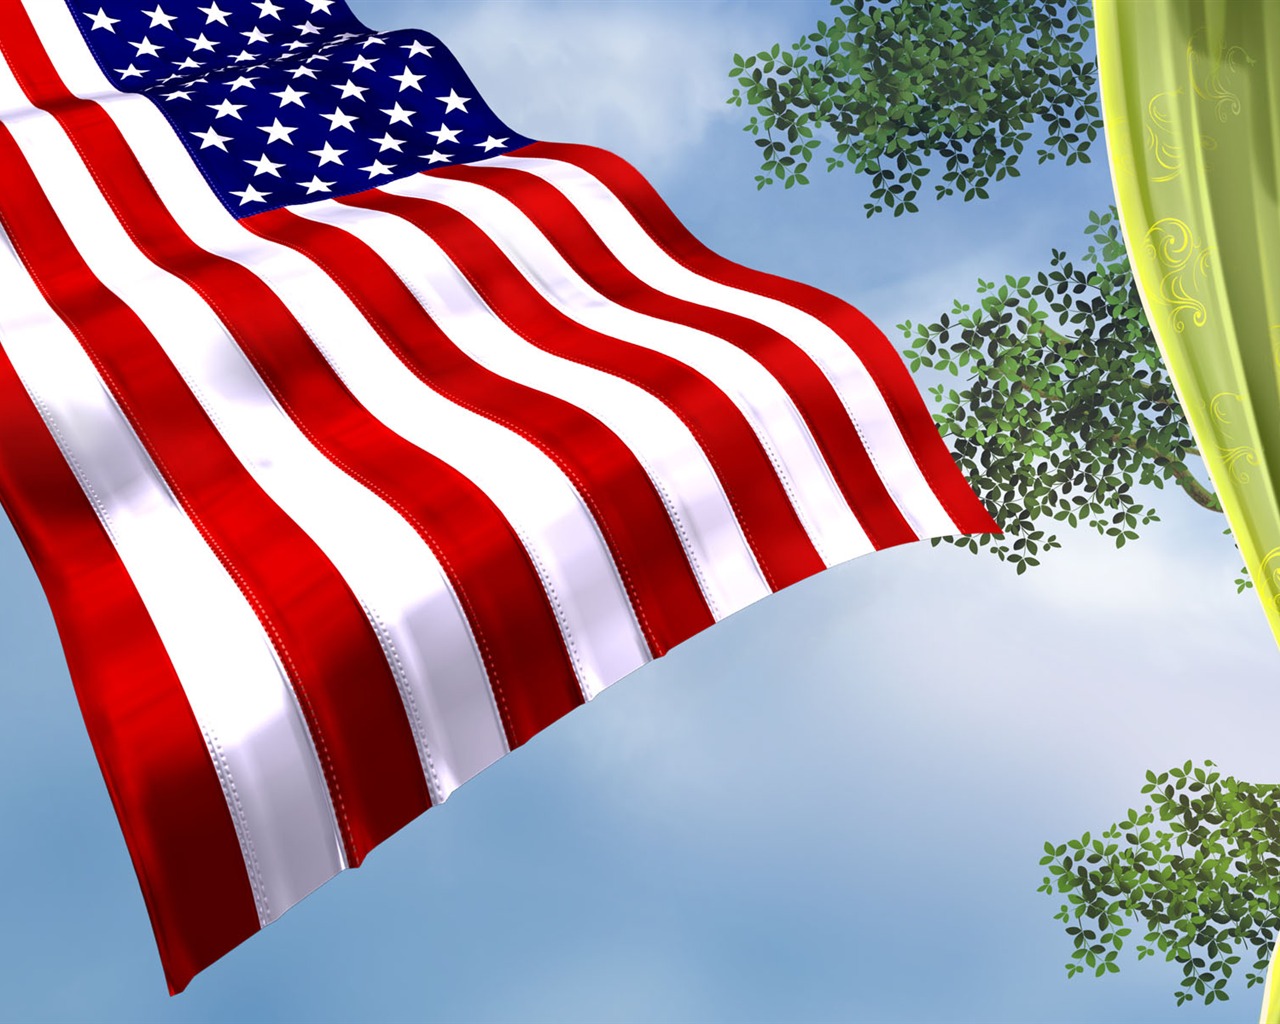 U.S. Independence Day theme wallpaper #33 - 1280x1024